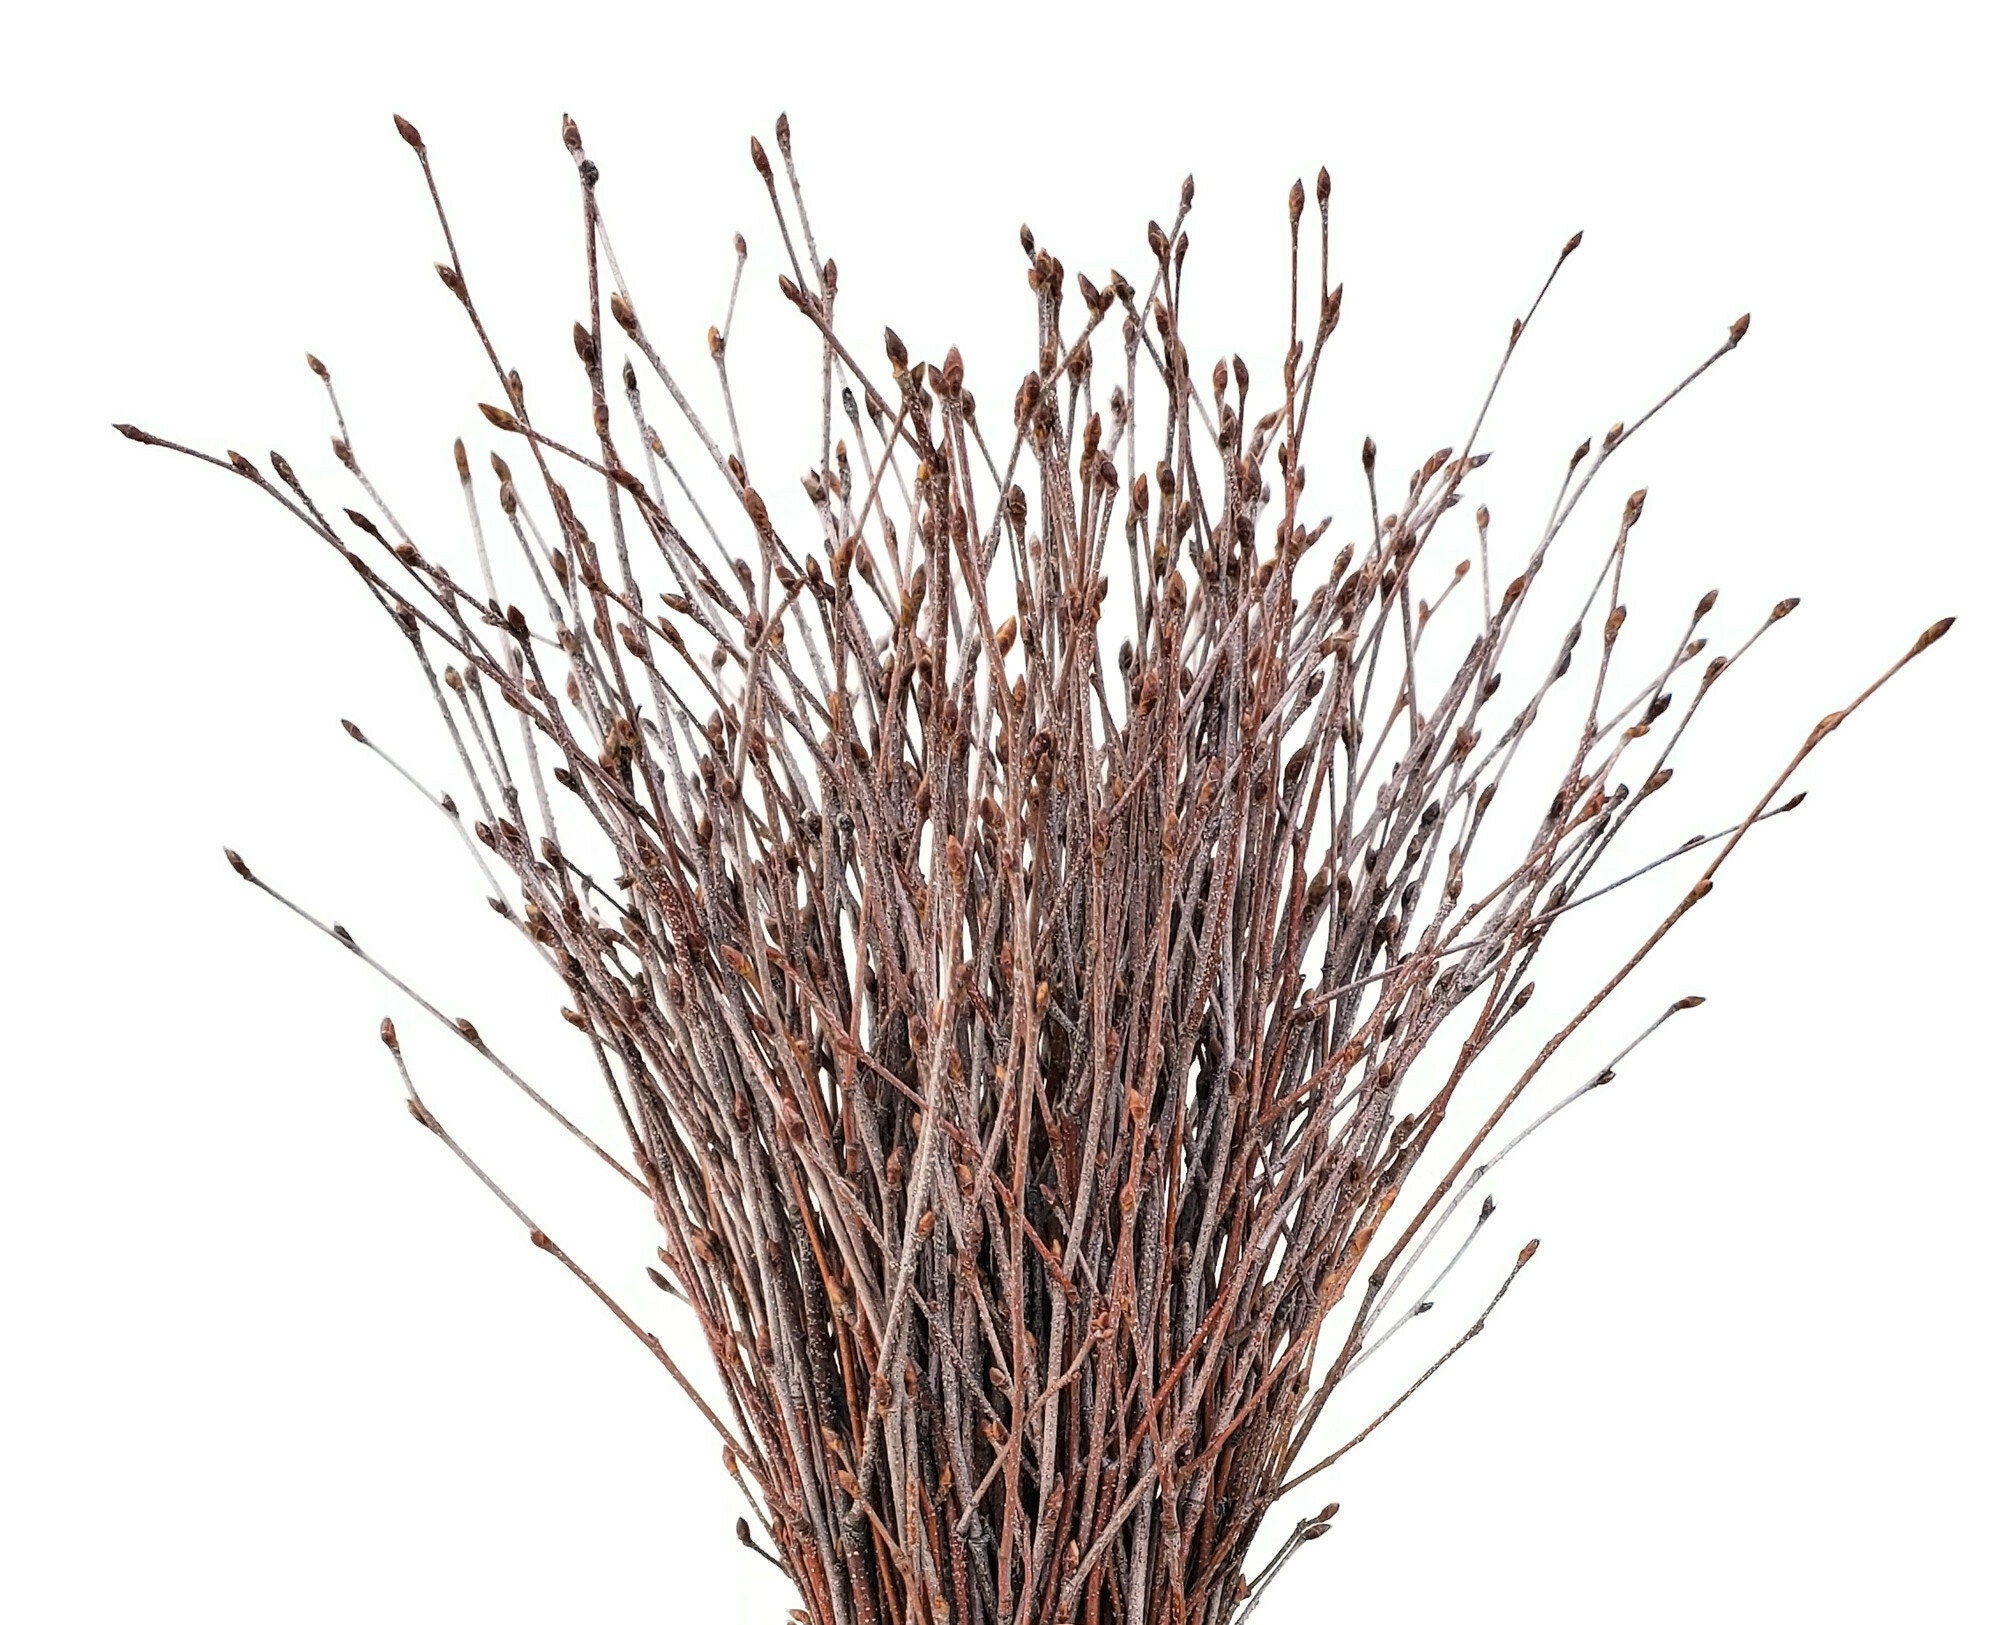 Cherry tree twigs, craft sticks and branches, twig craft supplies, natural  craft supplies, florist's supply